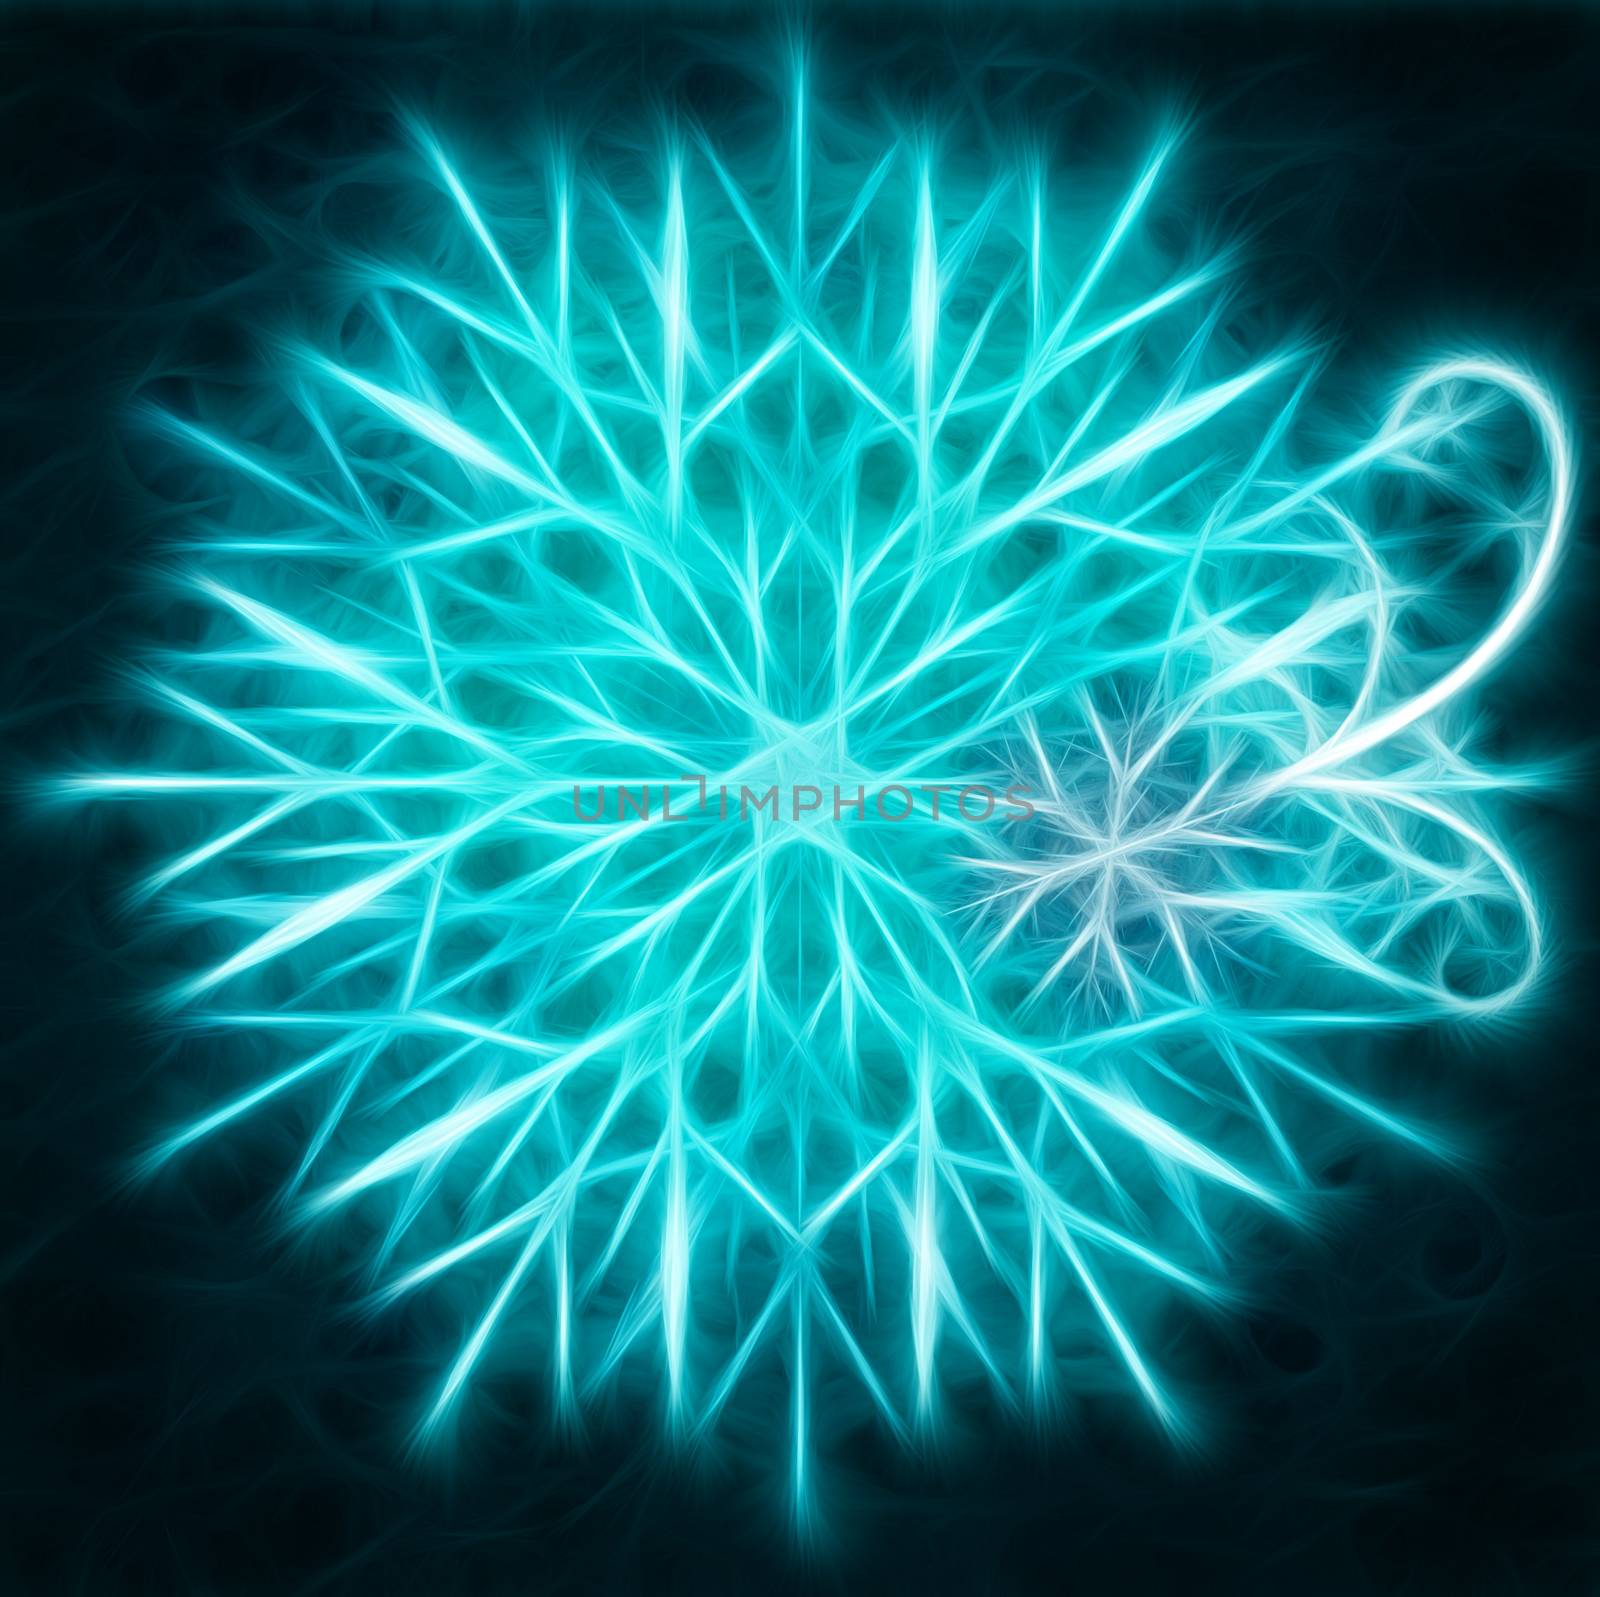 green-blue snowflakes grunge square background by CherJu